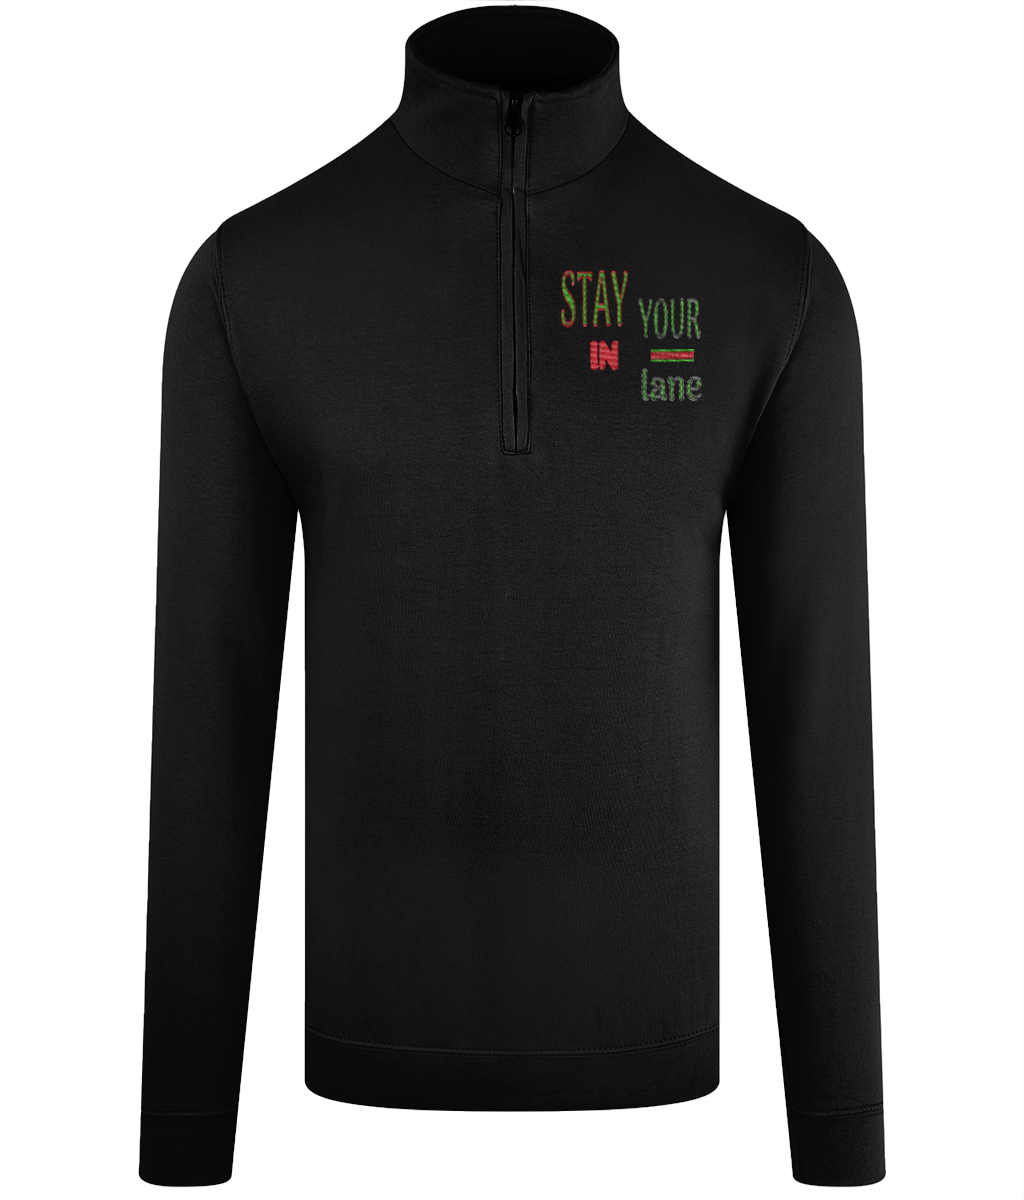 STAY IN YOUR lane 01-01 Designer Unisex Embroidered AWDis Sophomore ¼ Zip Sweatshirt  (2 Colors)